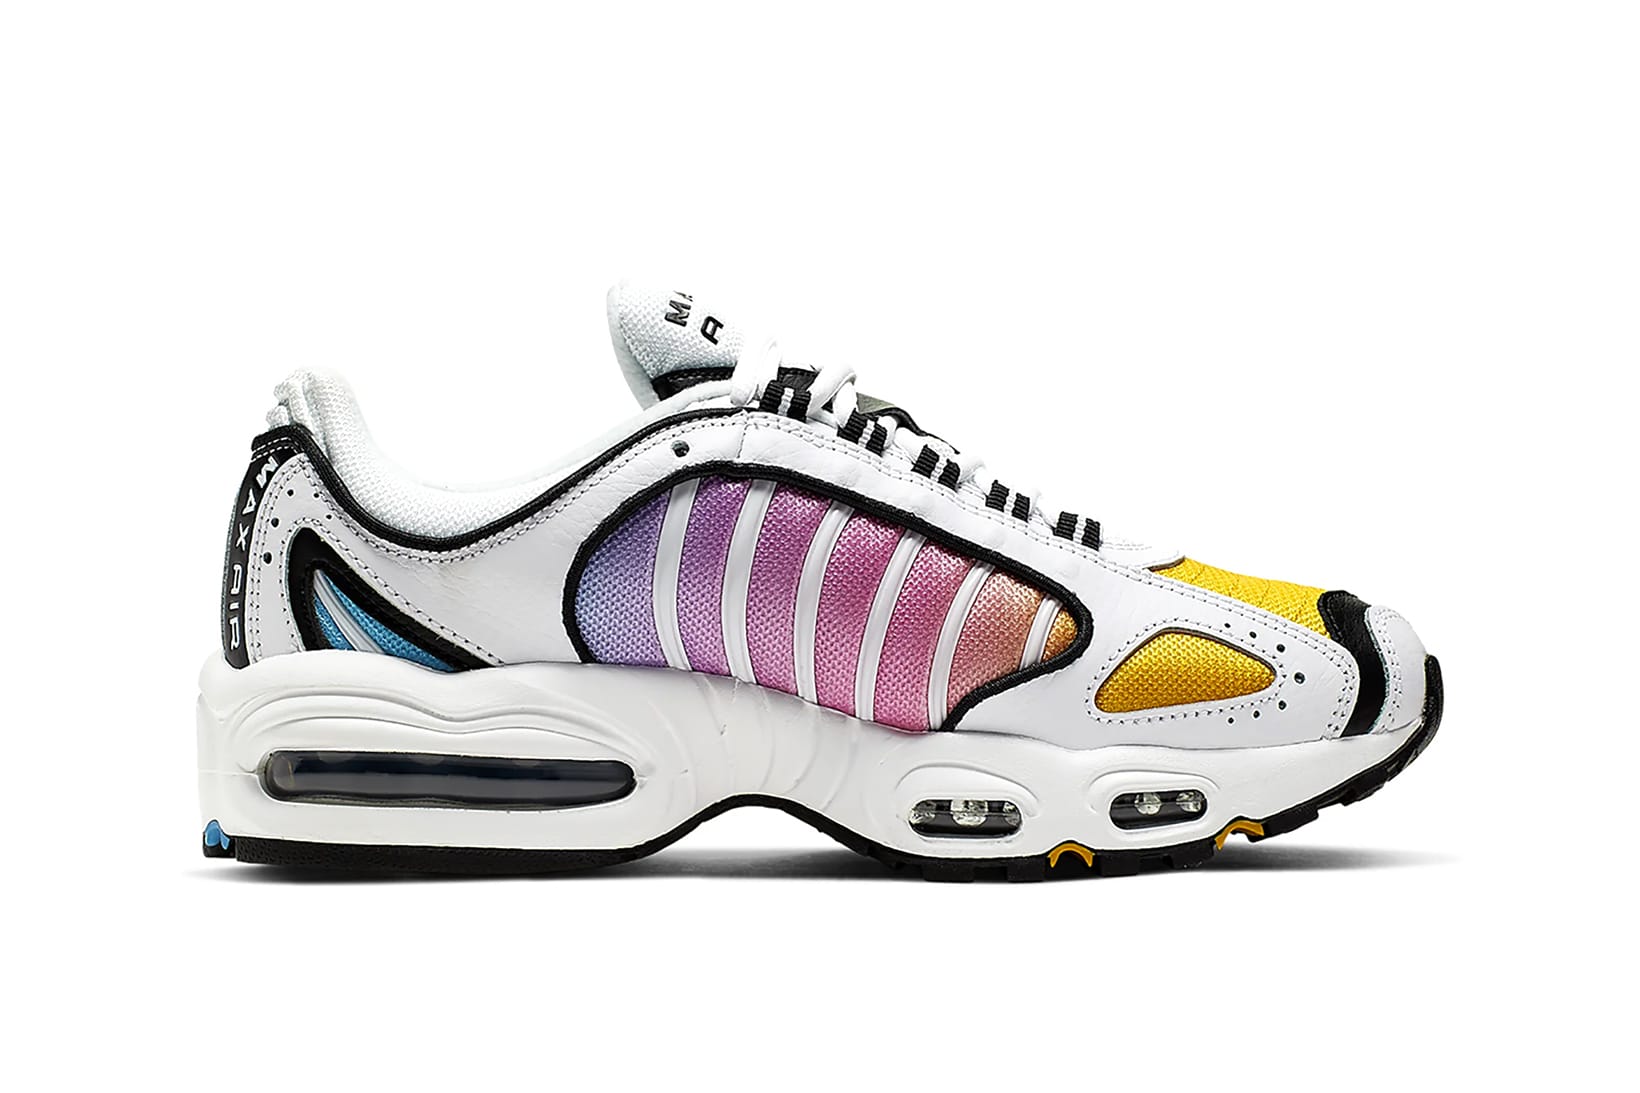 Nike Air Max Tailwind IV in Colorful 